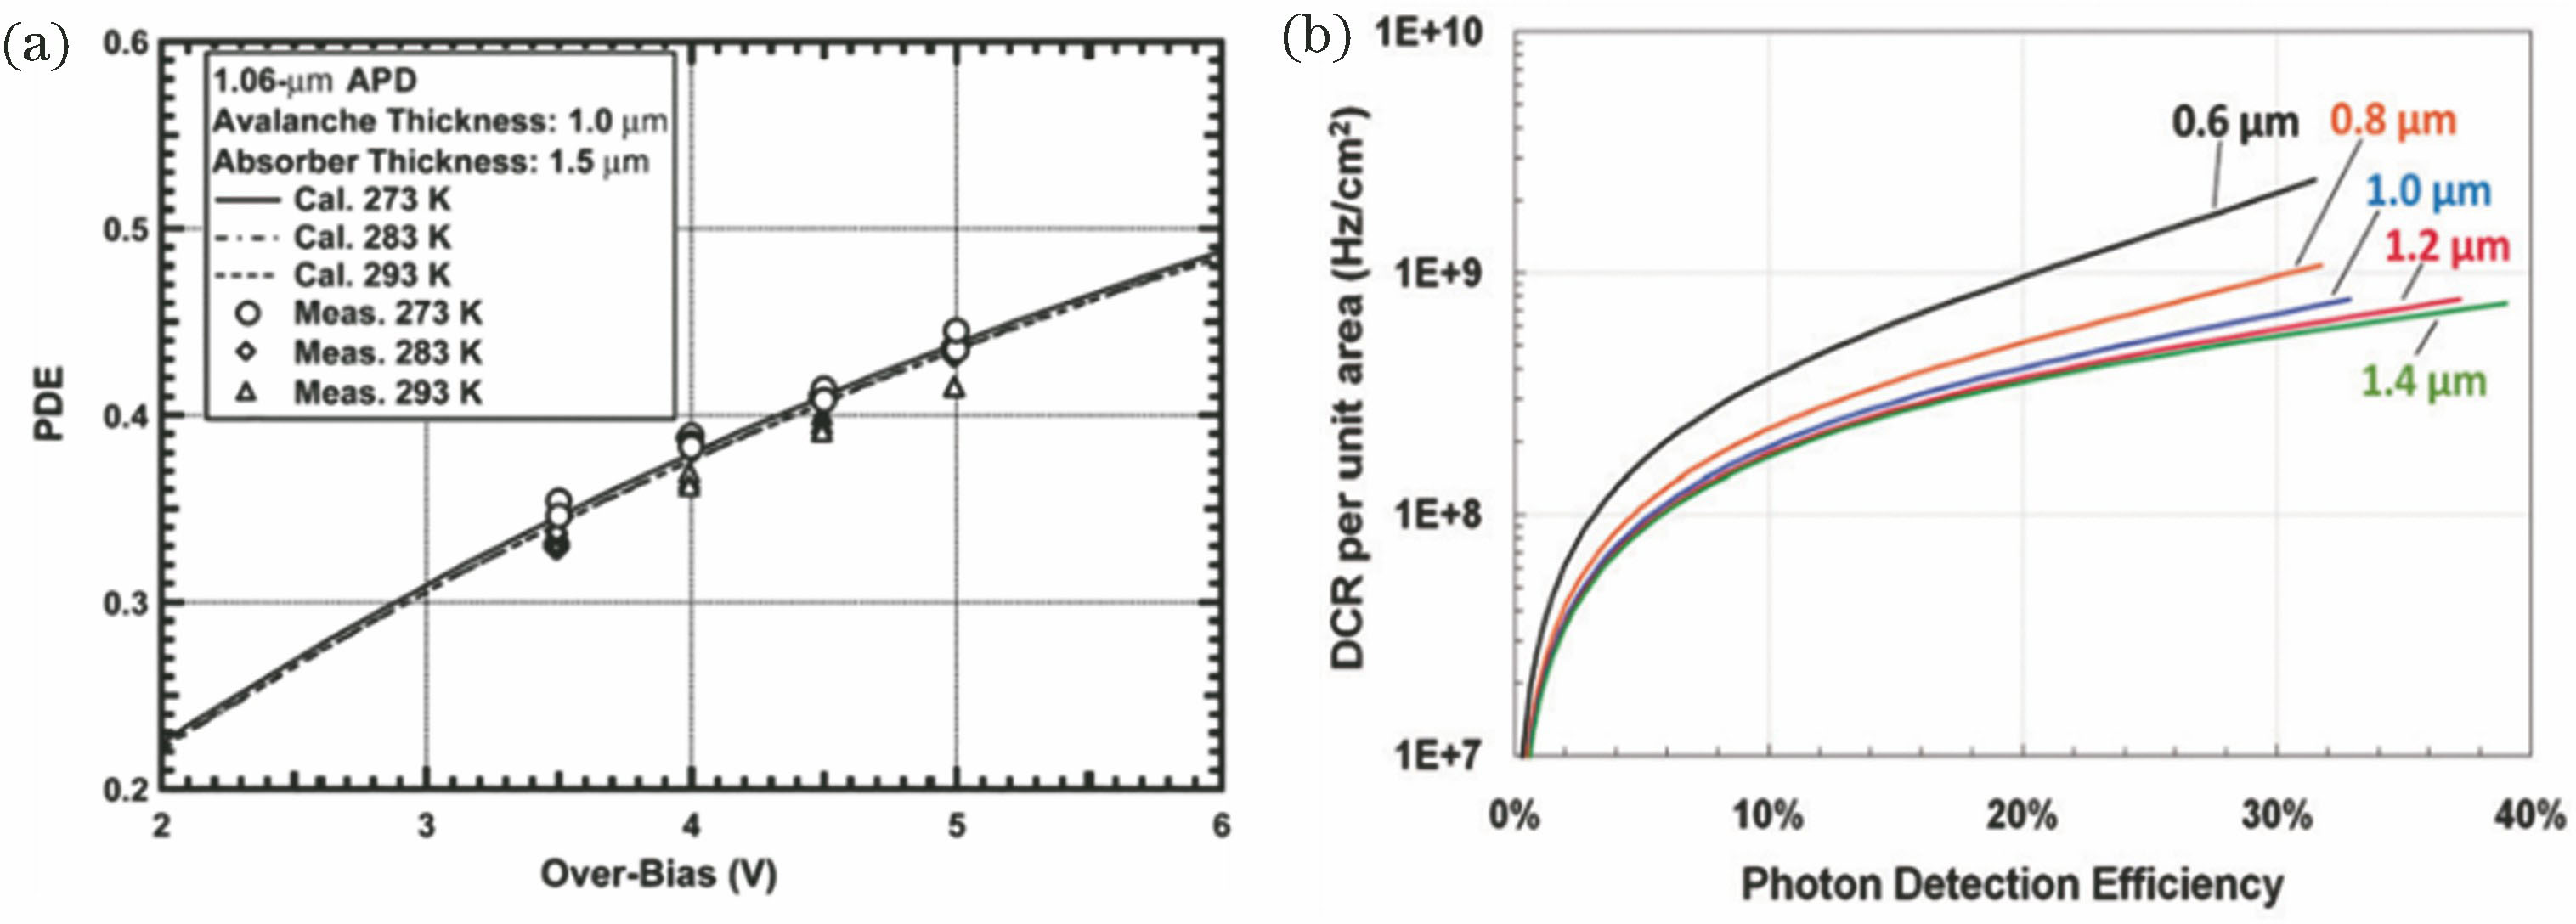 Parameter relationships. (a) Relationship between PDE and over-bias at different temperatures[15]; (b) relationship between DCR and PDE for devices with different thicknesses of multiplication layers and fixed PDE[16]